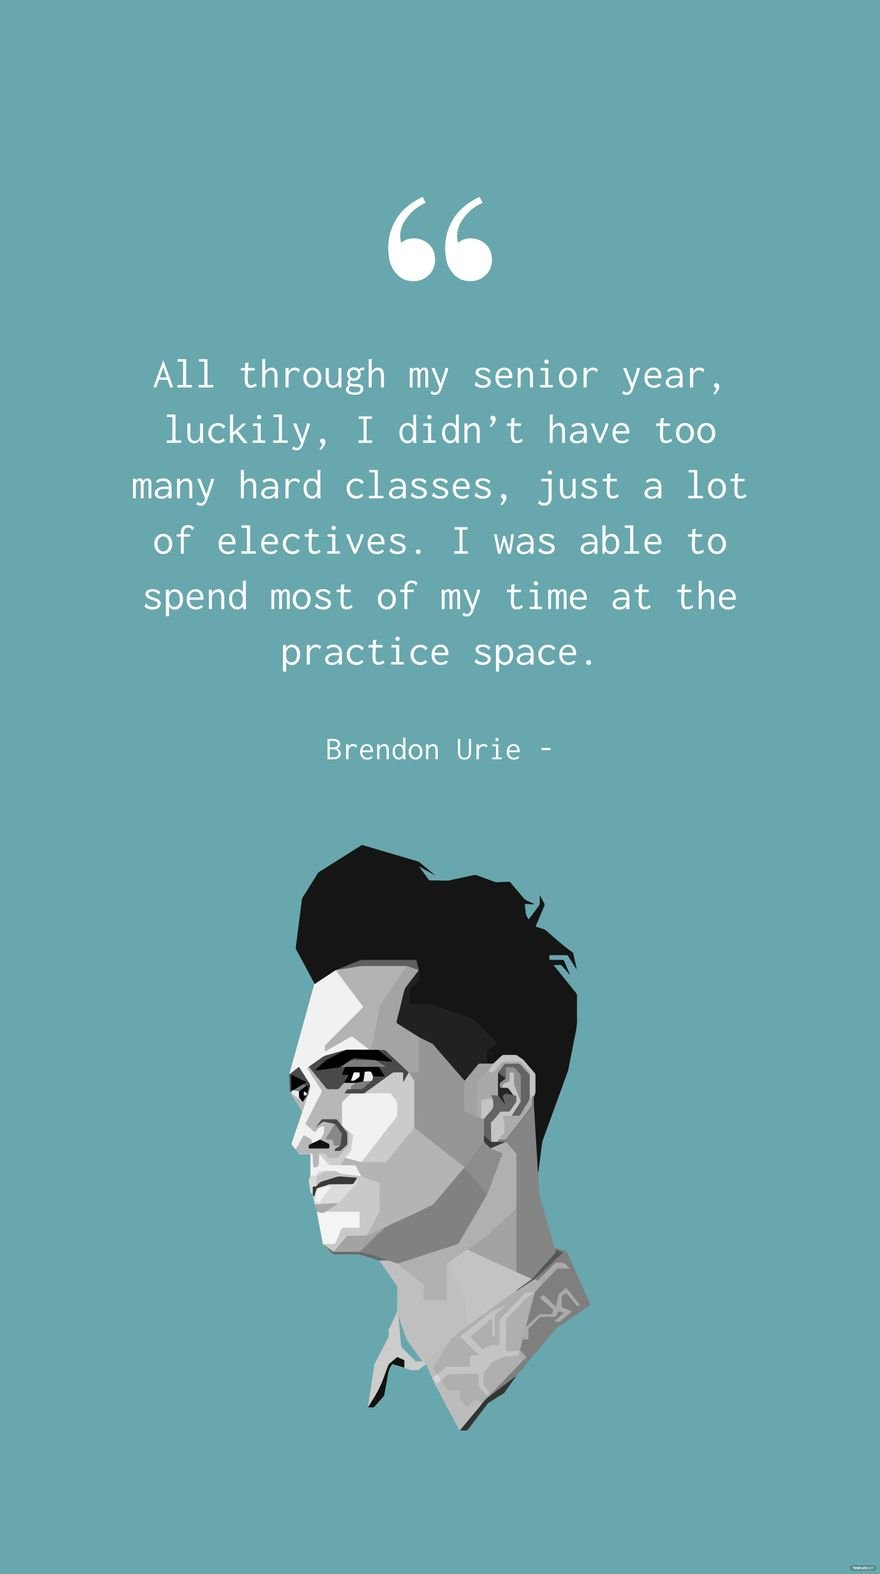 Brendon Urie - All through my senior year, luckily, I didn’t have too many hard classes, just a lot of electives. I was able to spend most of my time at the practice space.